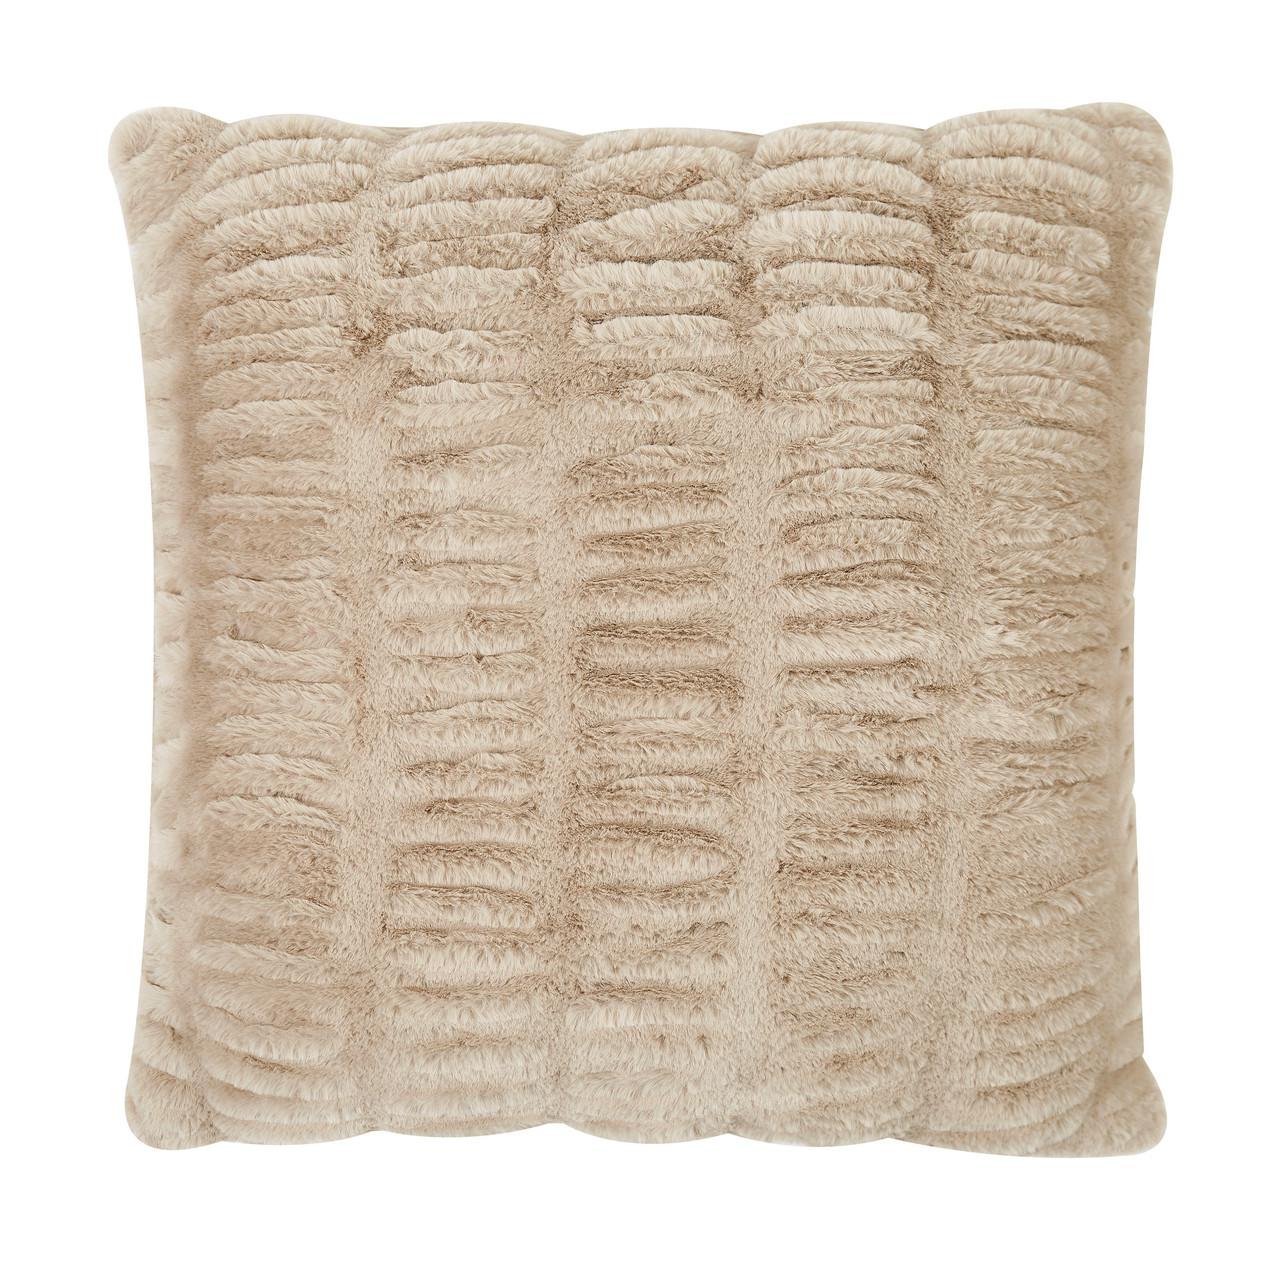 Ruched Faux Fur Decorative Pillow by BADGLEY MISCHKA